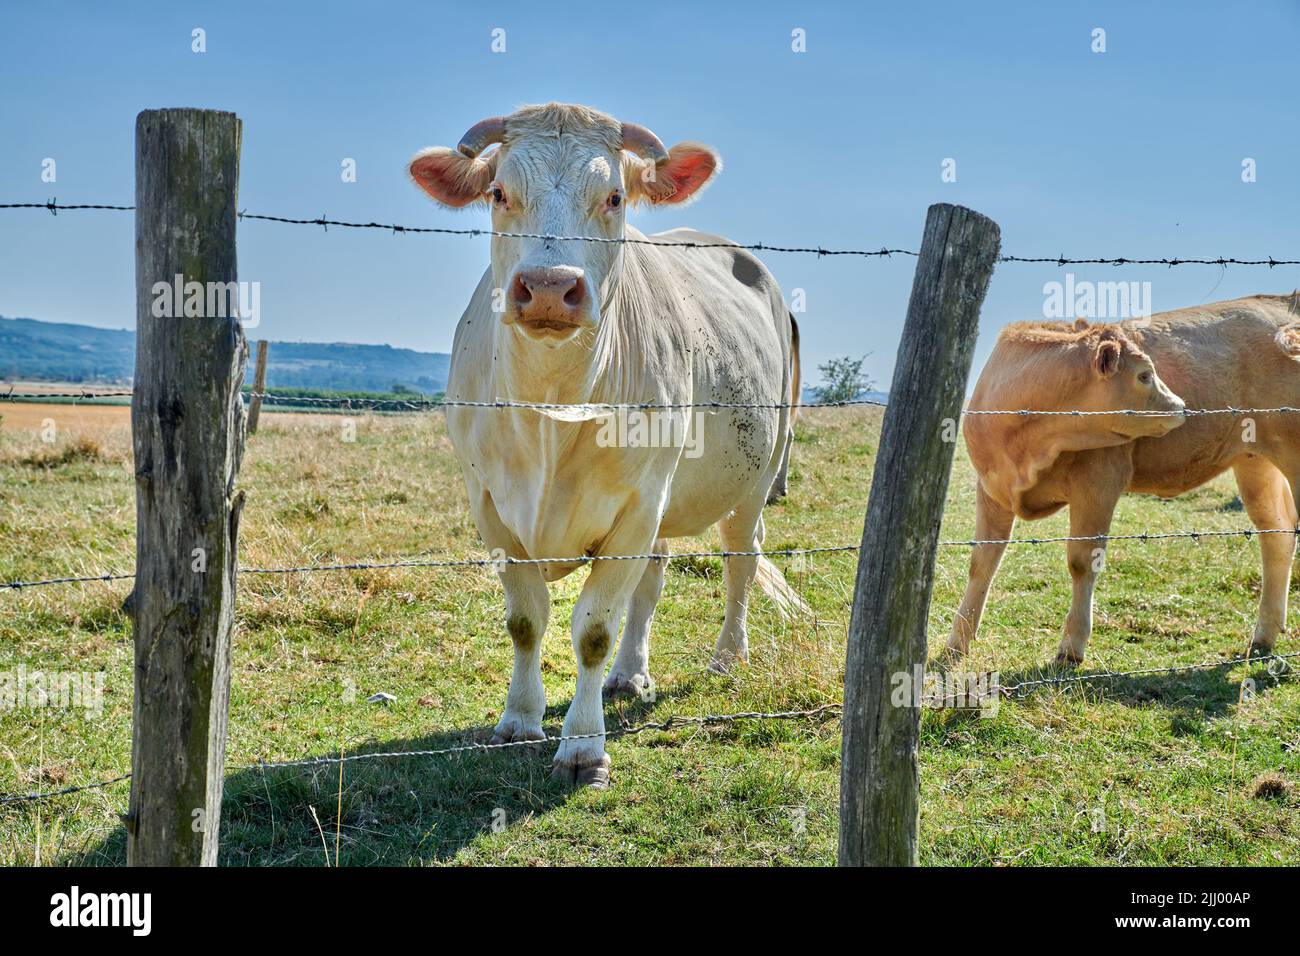 Raising and breeding livestock animals in agribusiness for cattle and dairy industry. Curious cow, one white charolais cow standing behind a barb wire Stock Photo